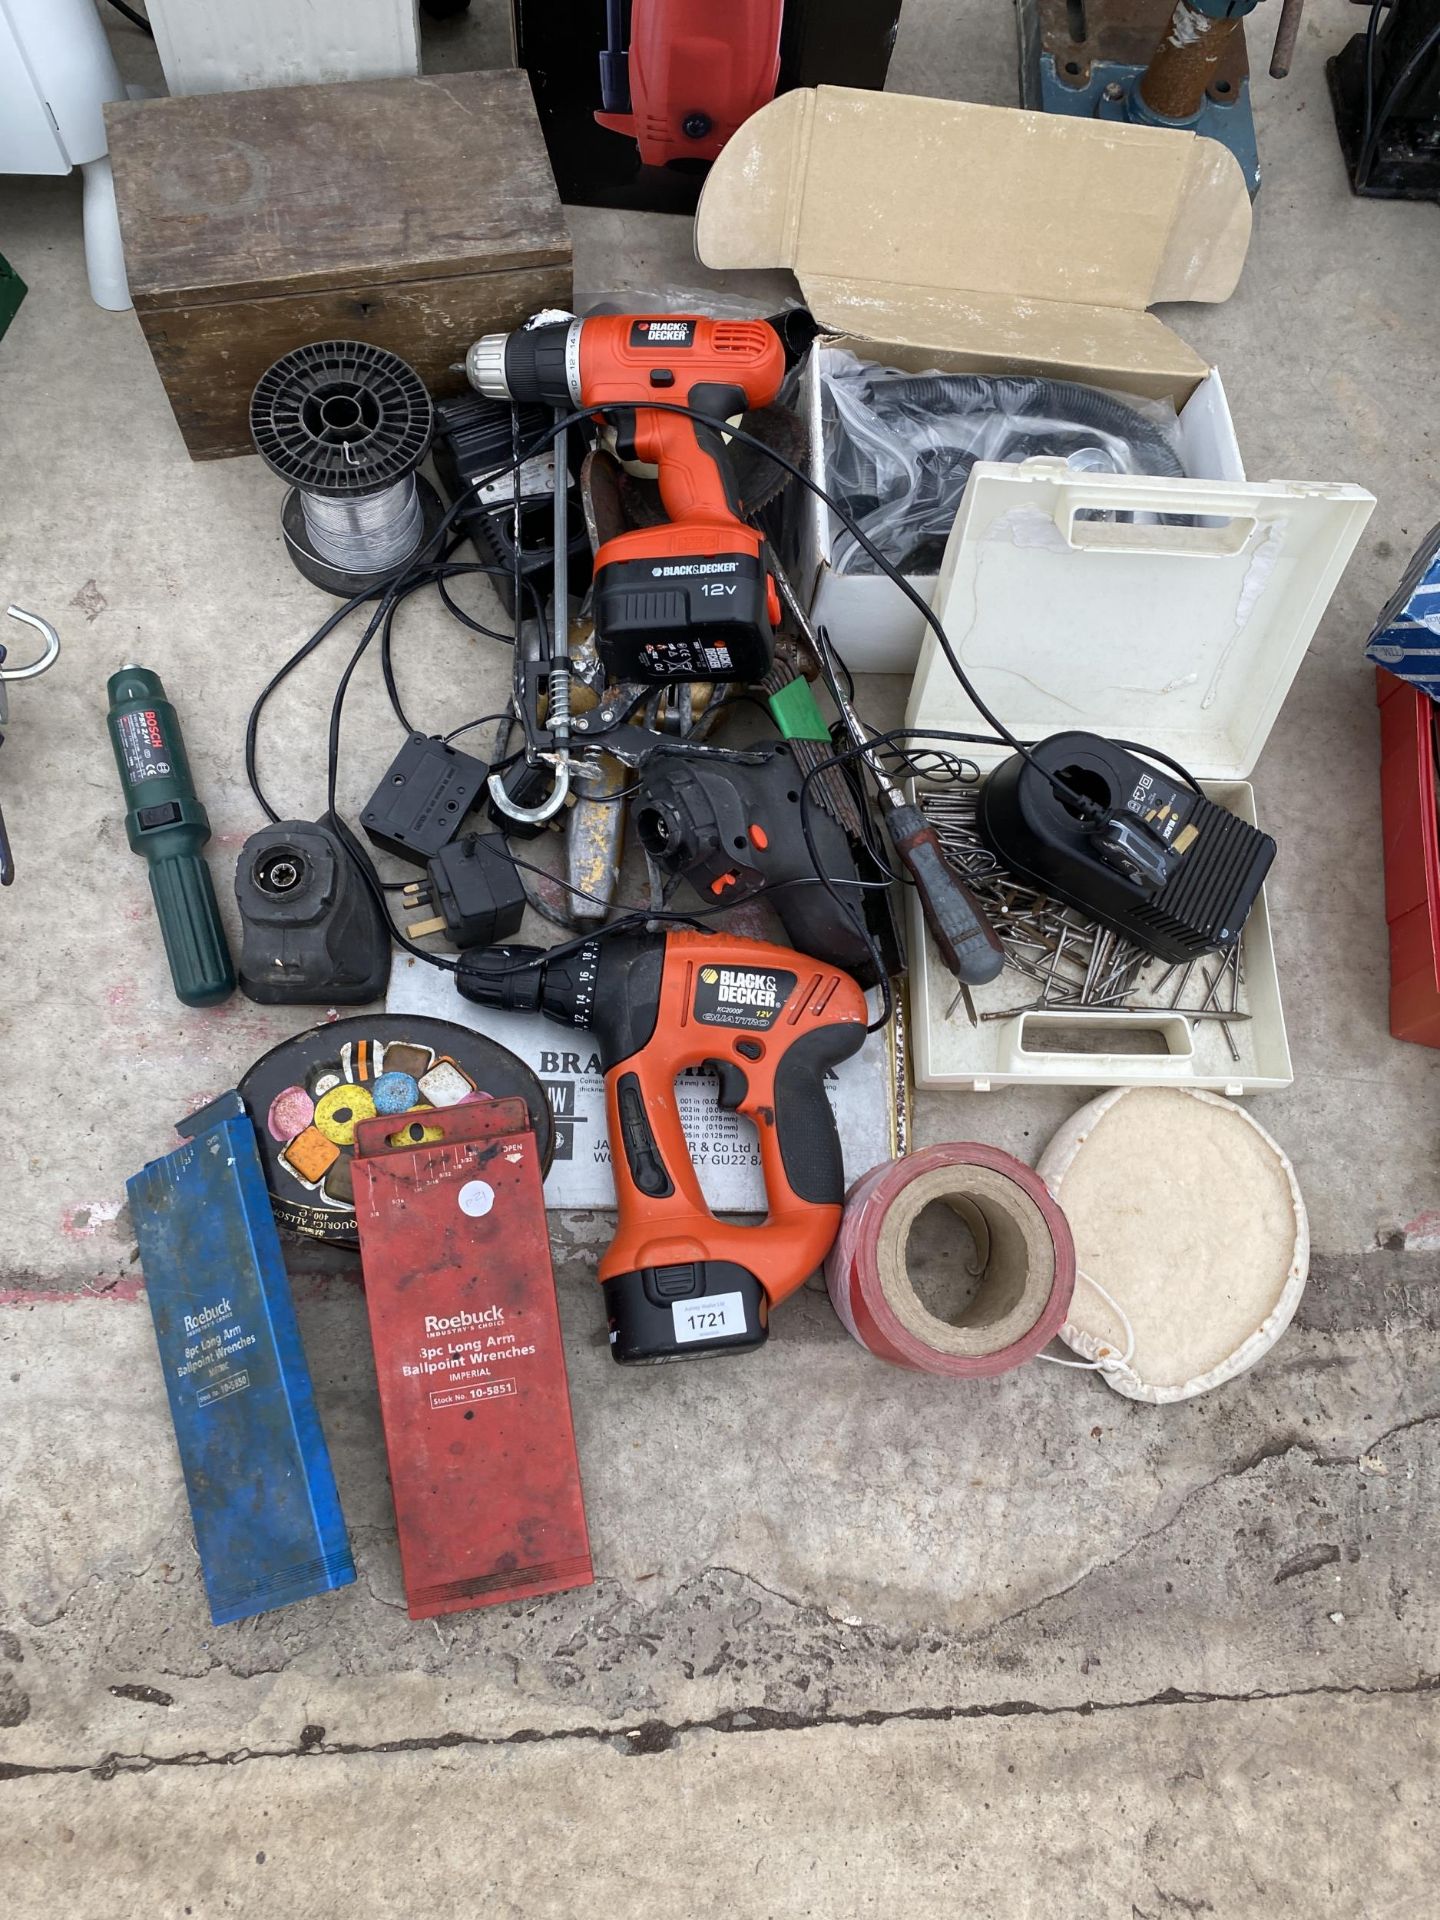 AN ASSORTMENT OF TOOLS TO INCLUDE A BLACK AND DECKER BATTERY DRILL AND A BLACK AND DECKER